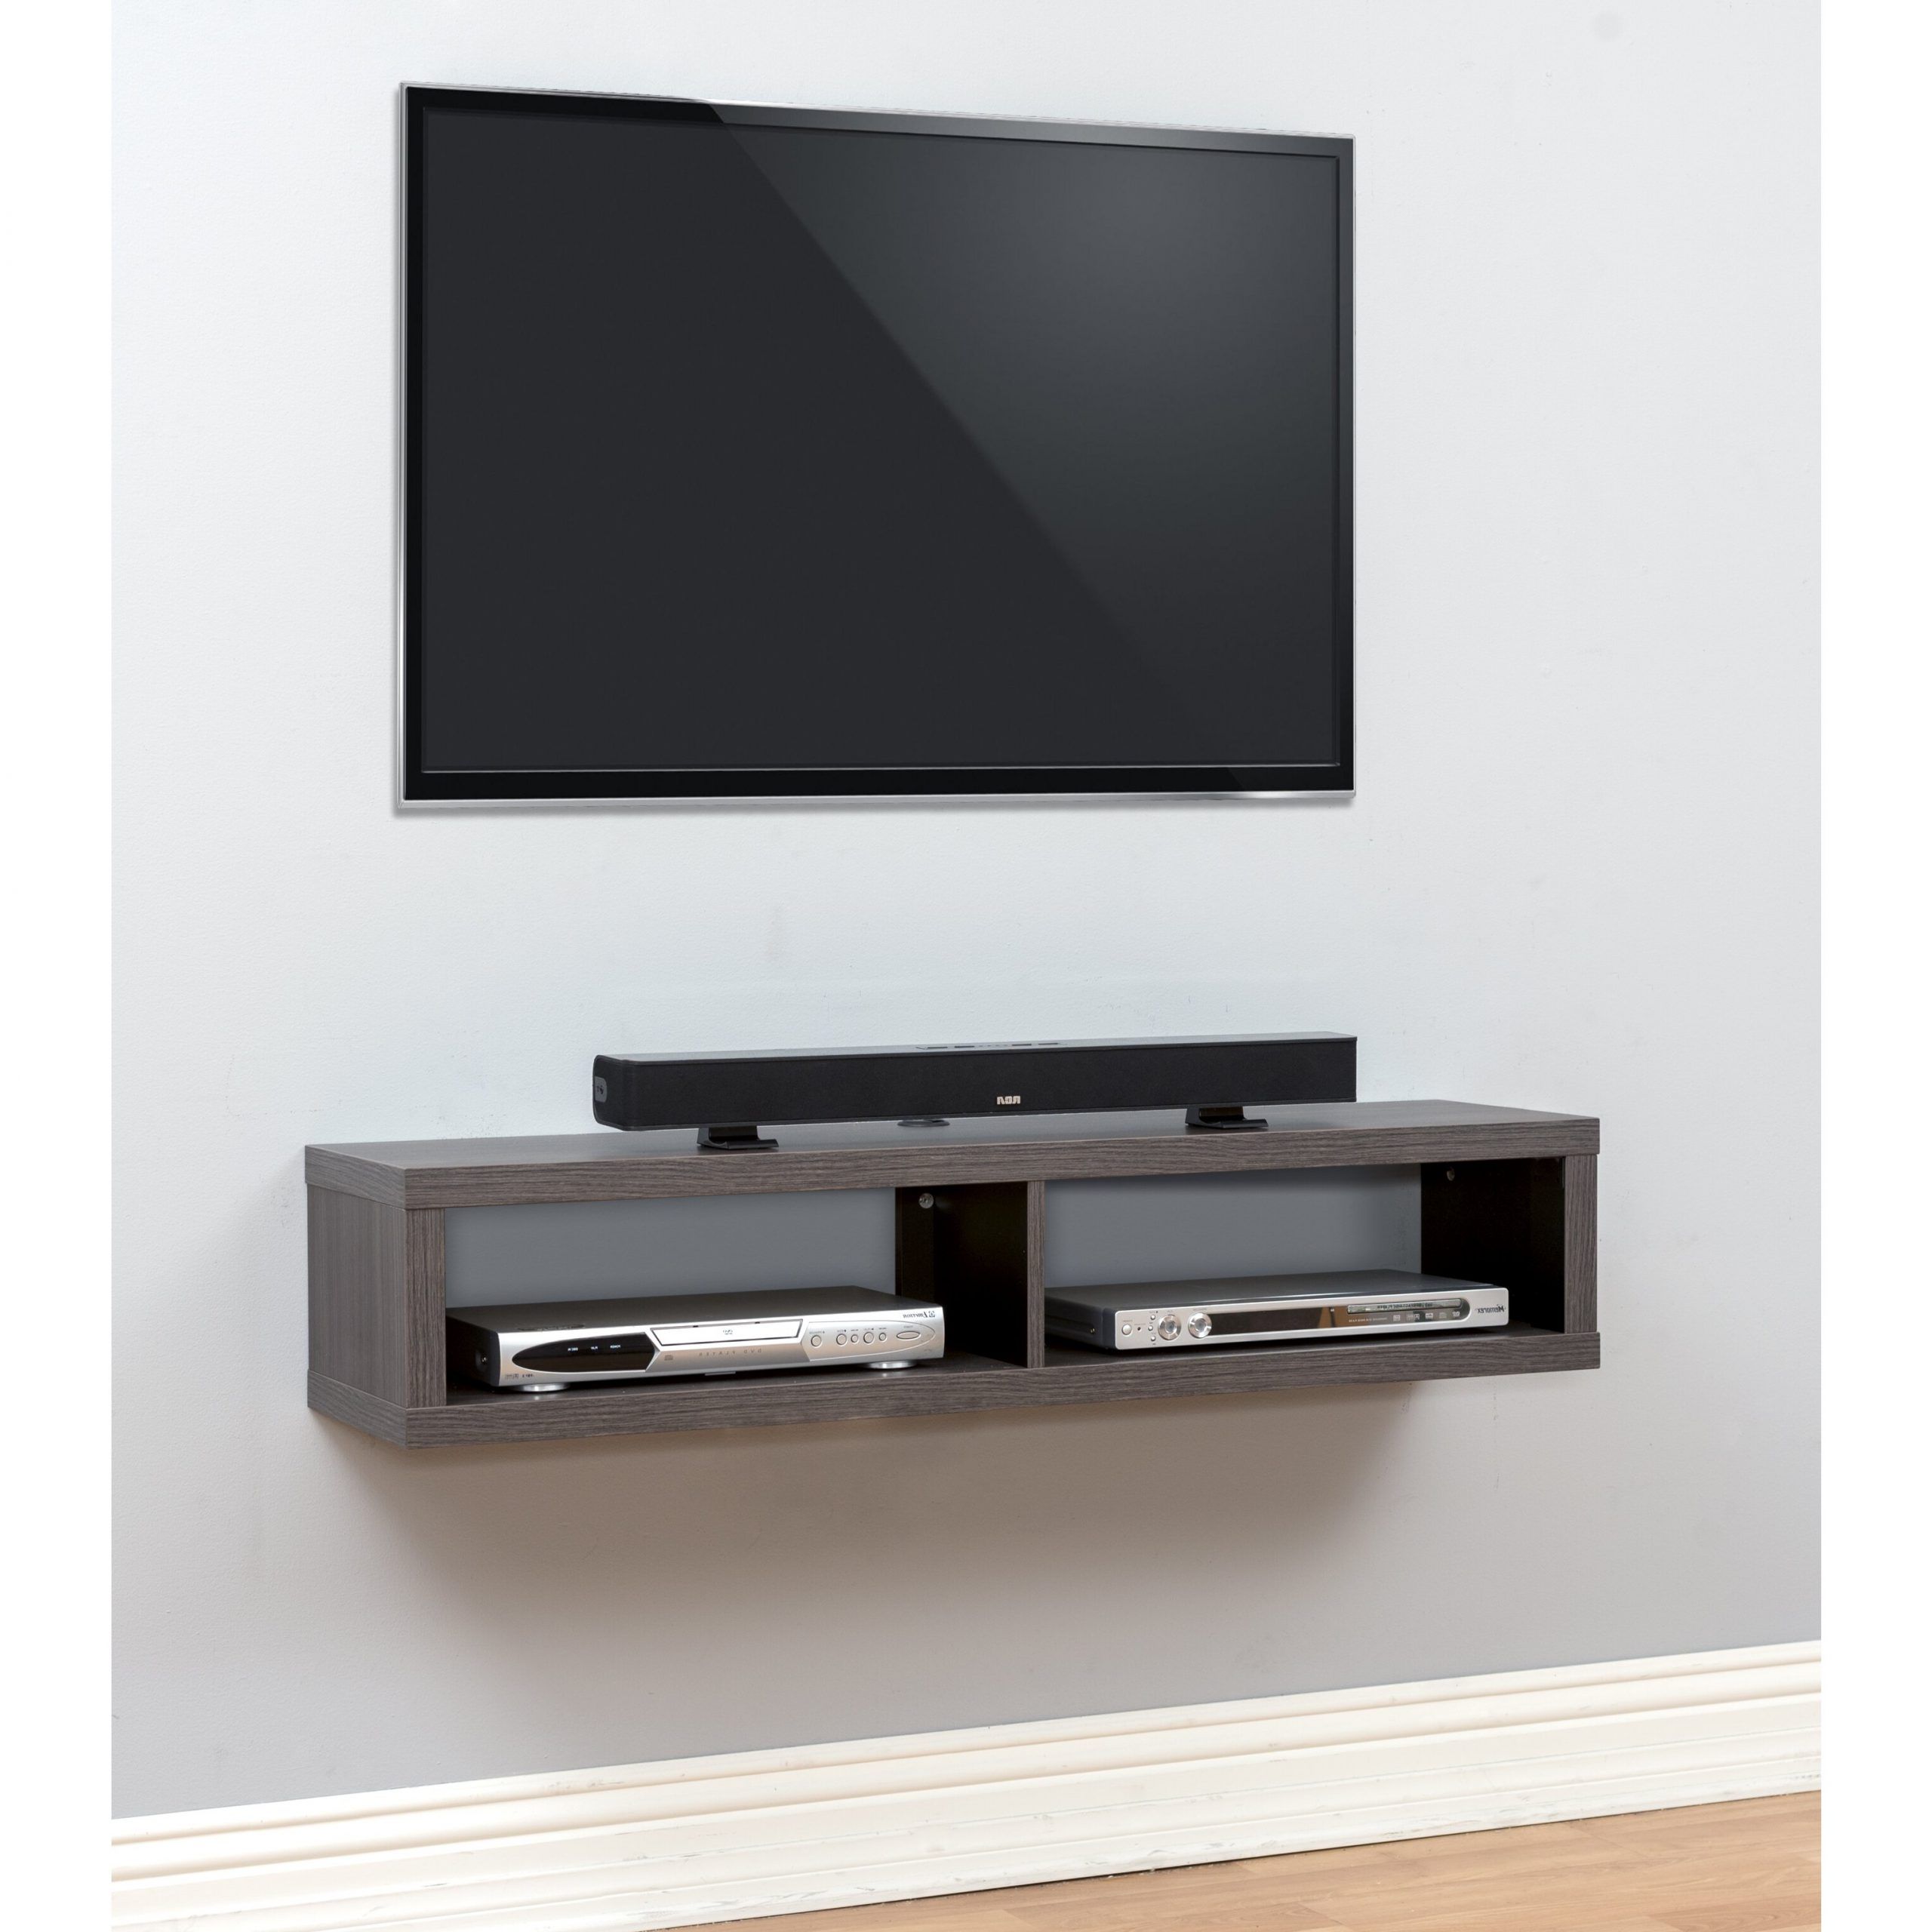 Martin Home Furnishings 48" Shallow Wall Mounted Tv With Regard To Floating Tv Shelf Wall Mounted Storage Shelf Modern Tv Stands (Gallery 11 of 20)